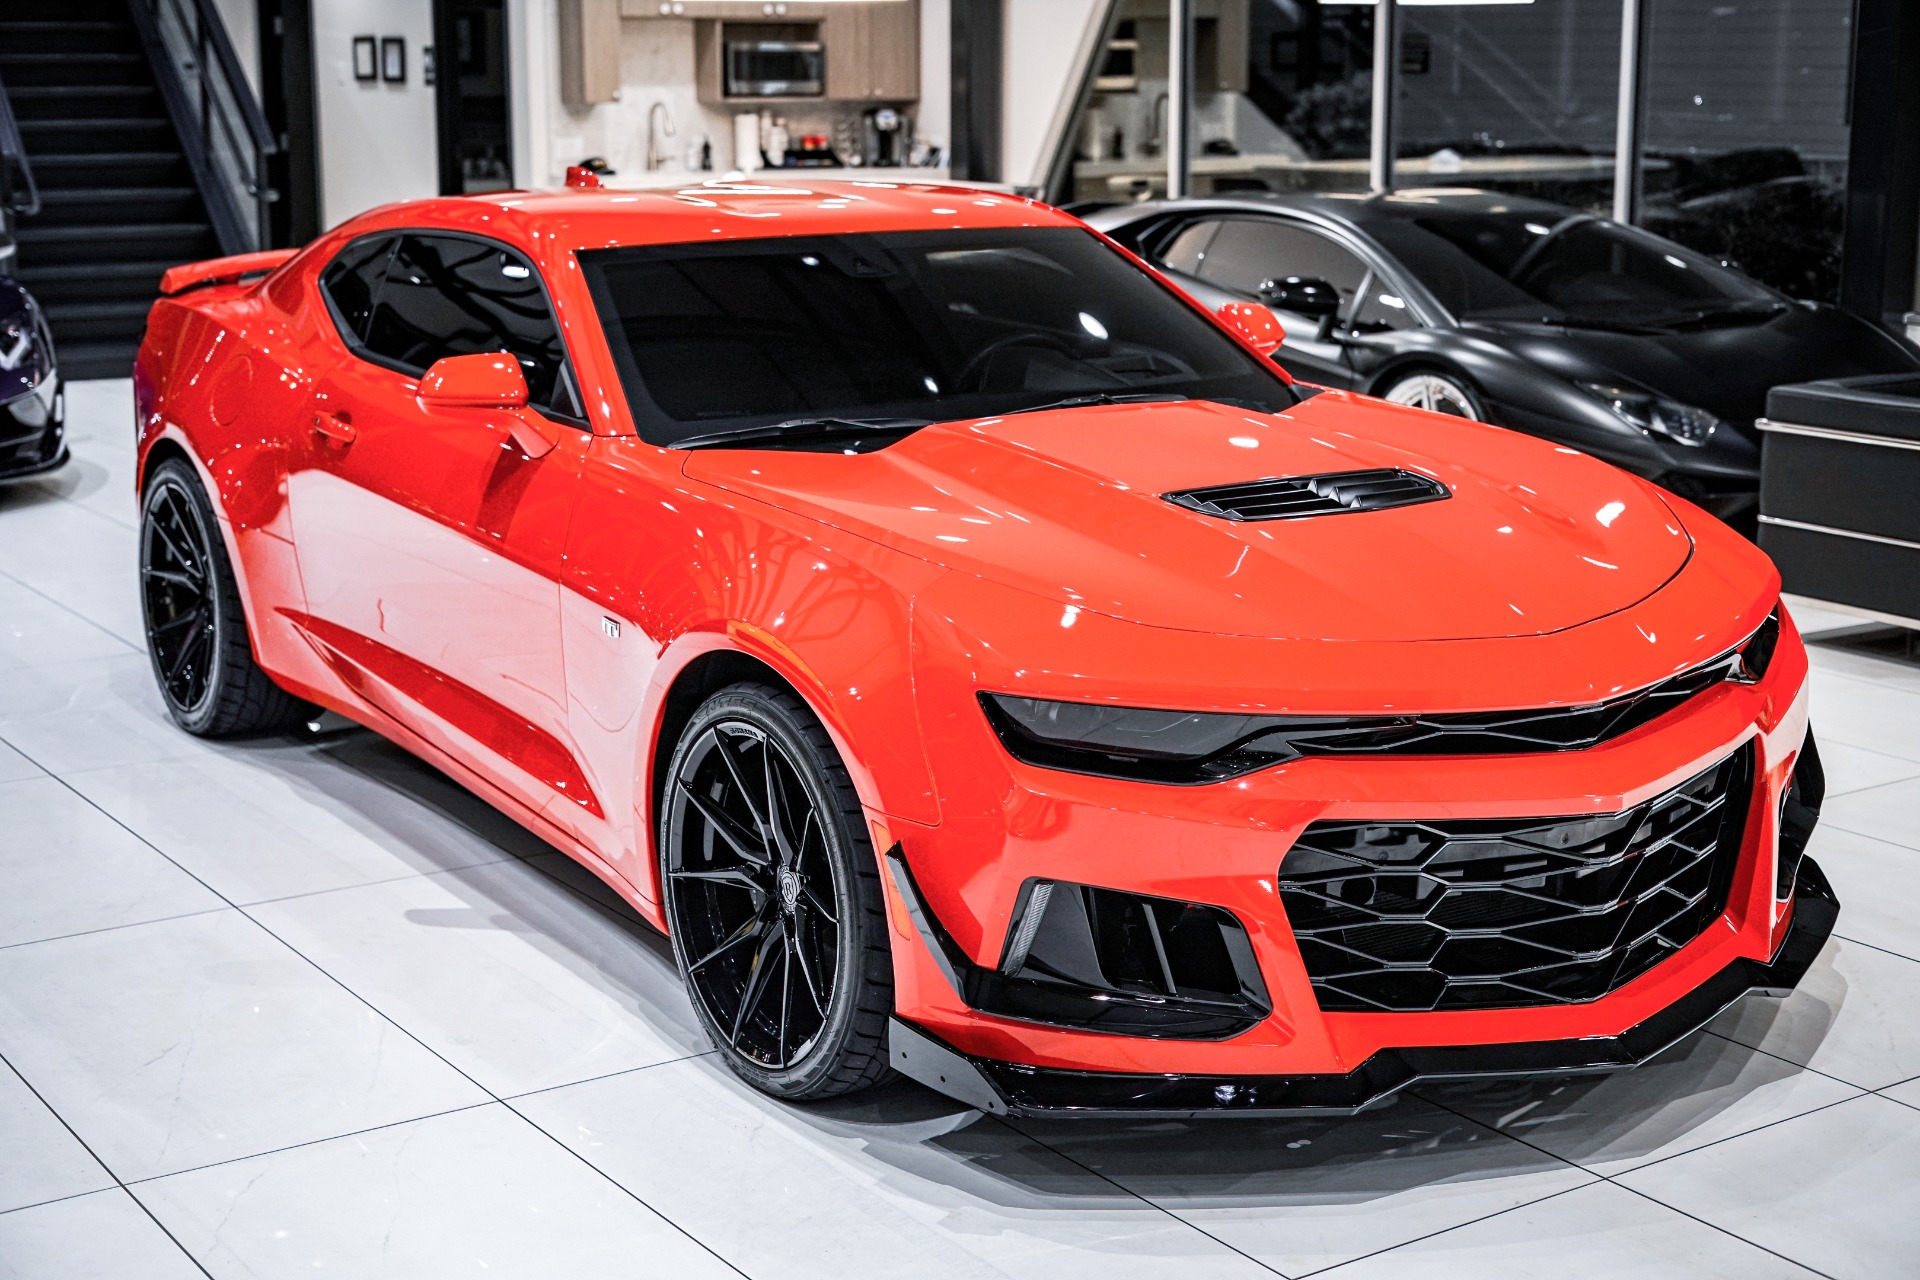 Used 2019 Chevrolet Camaro SS w/2SS Corsa Exhaust! Custom Tune! Rare Color!  Ceramic Coated! For Sale (Special Pricing) | Chicago Motor Cars Stock #18673